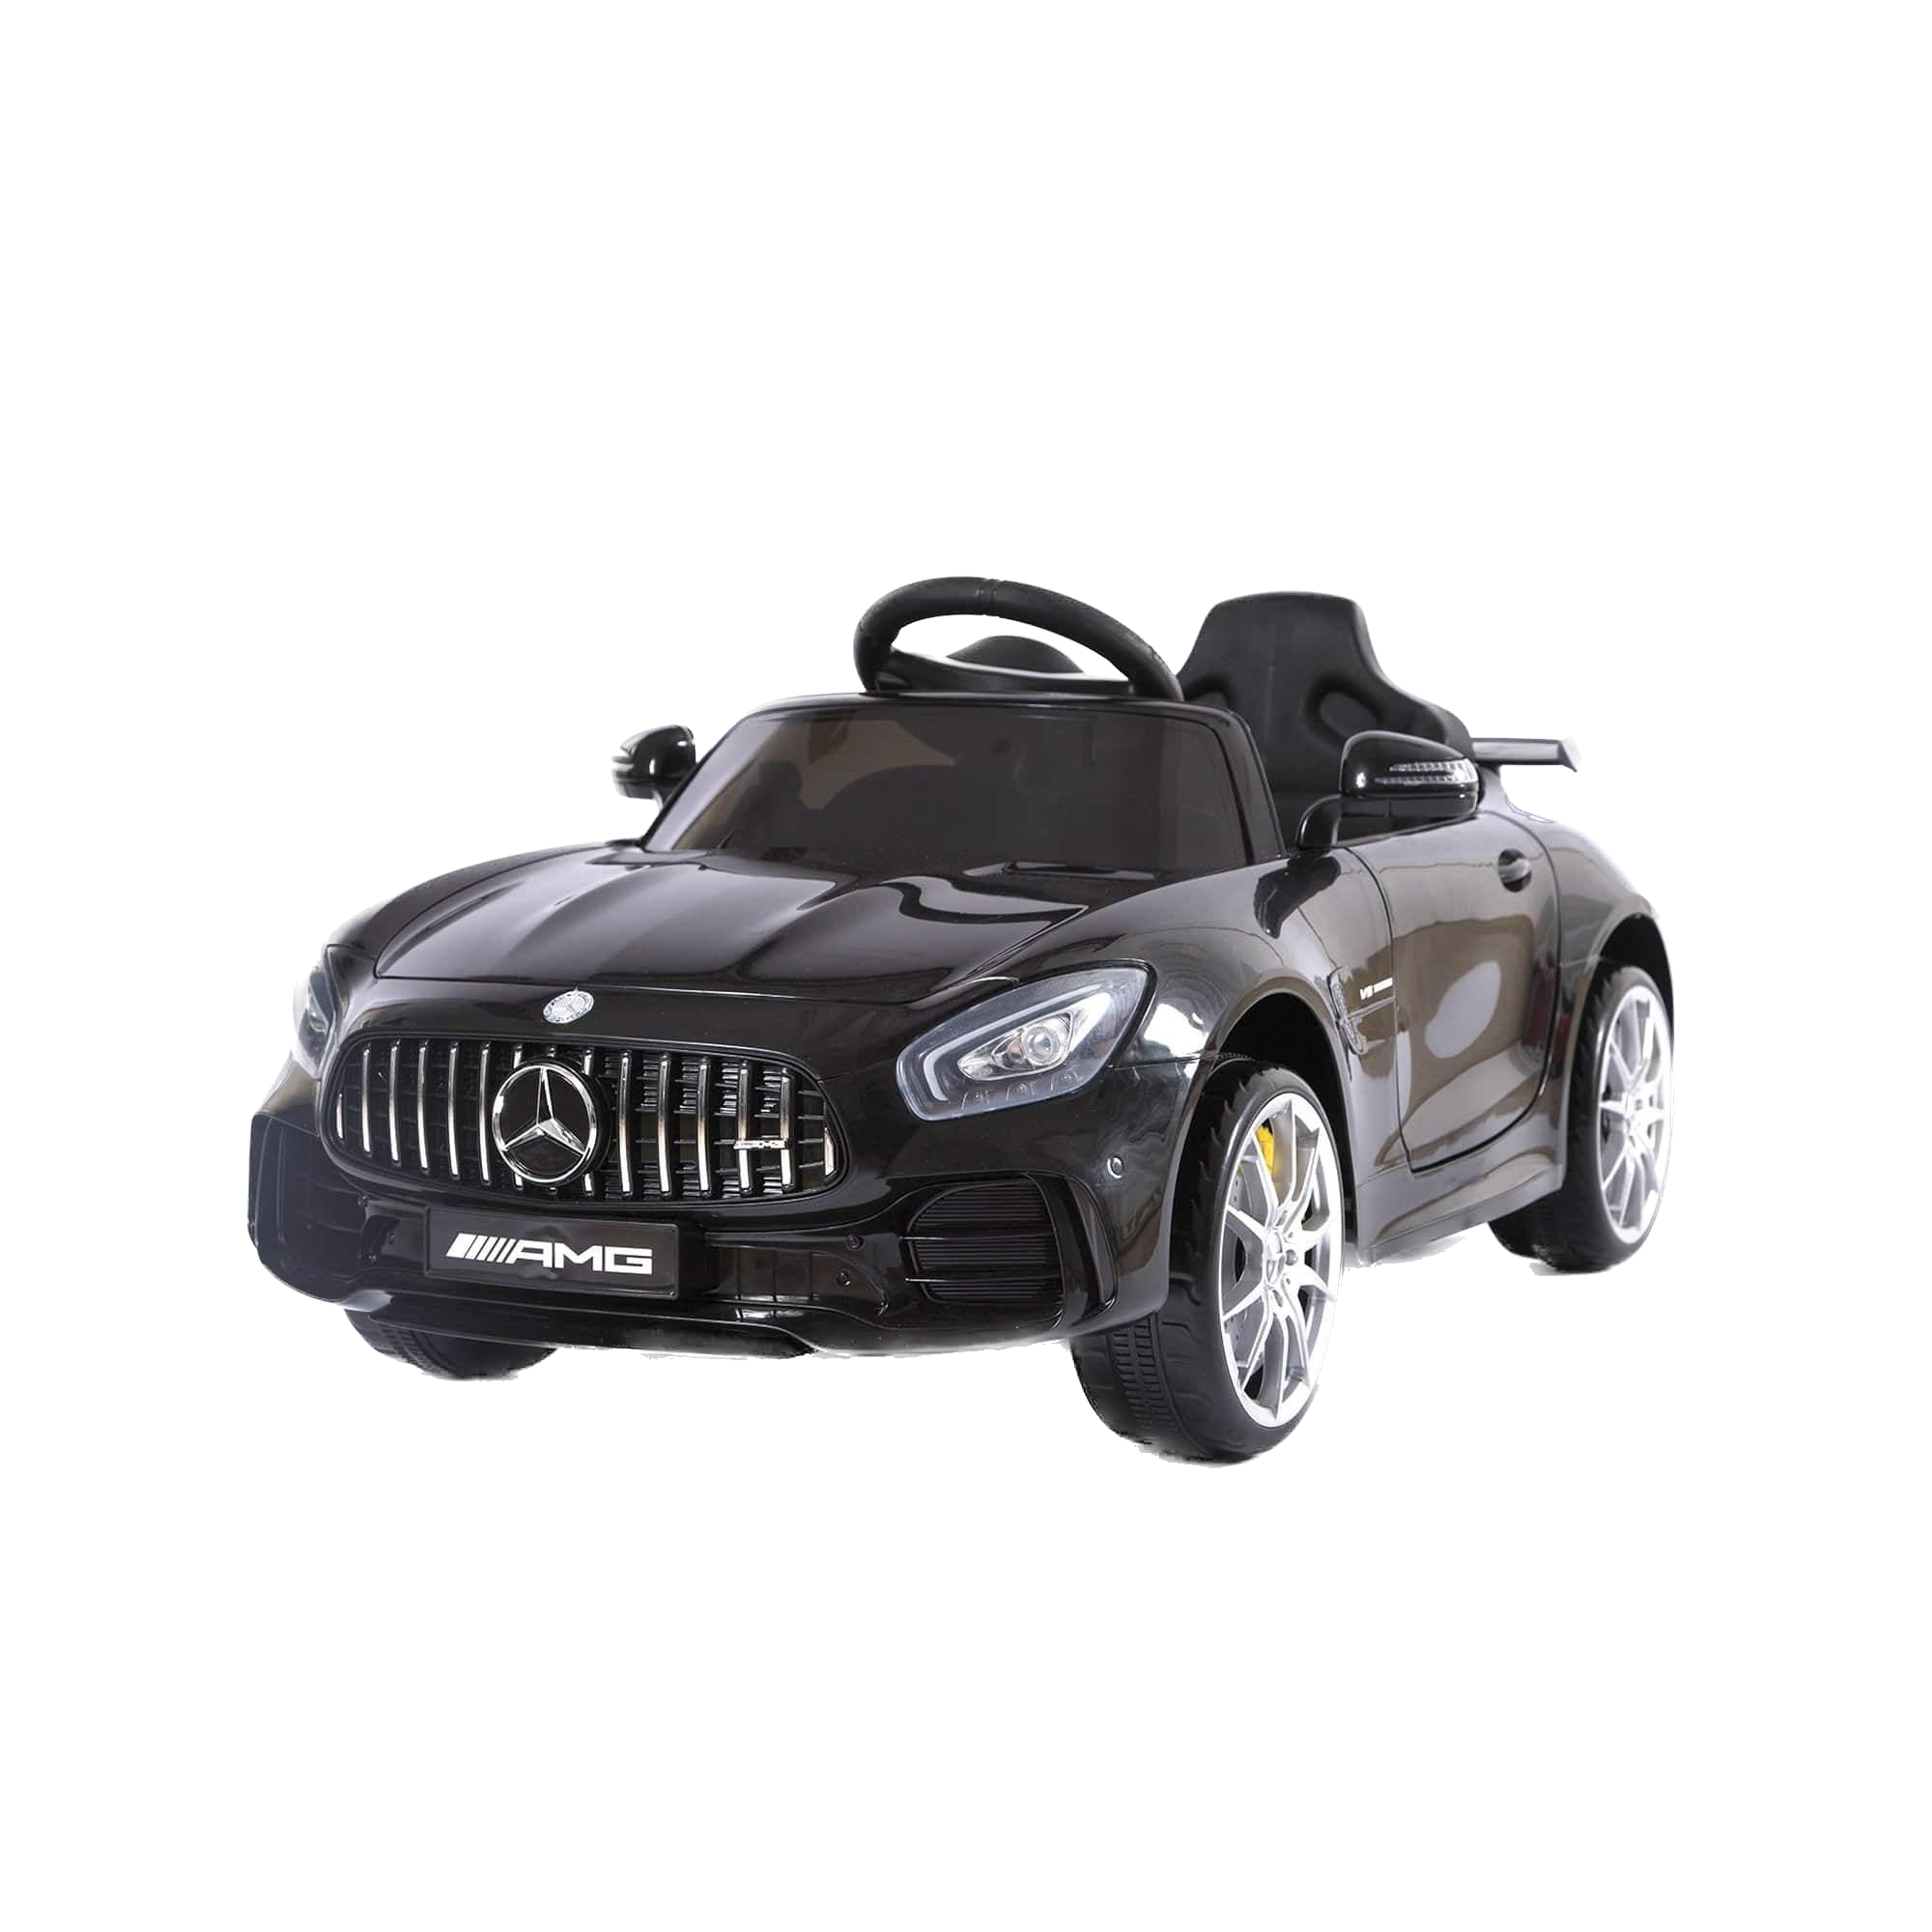 Licensed Mercedes Benz GTR AMG 12V Battery Operated 1 Seater Ride On Car With Parental Remote by Freddo